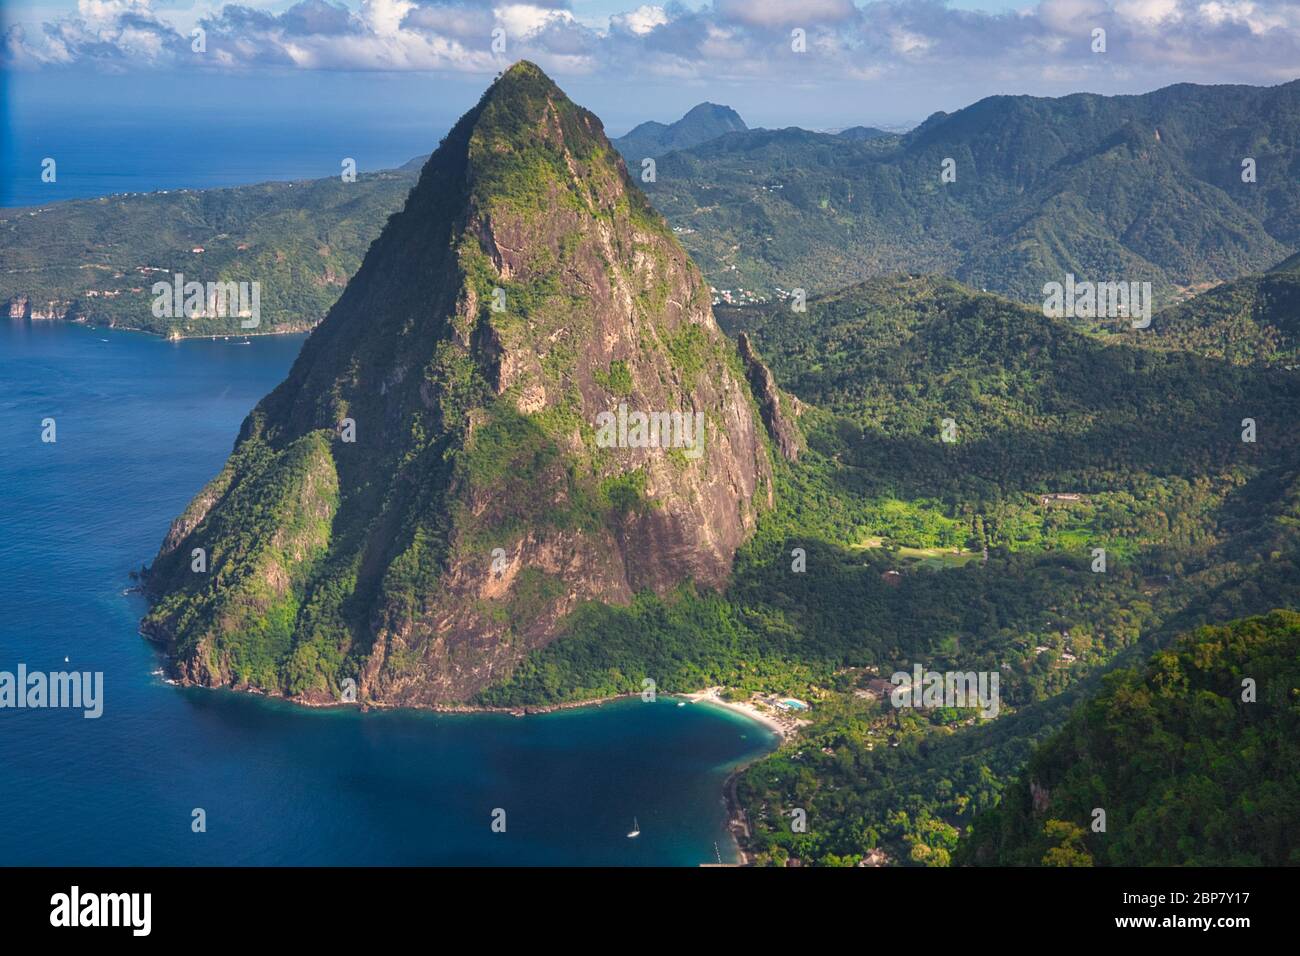 The peak of Gros Piton, tallest of two well known mountains in St Lucia, The Caribbean, West Indies. Aerial view with other green hills beyond Stock Photo